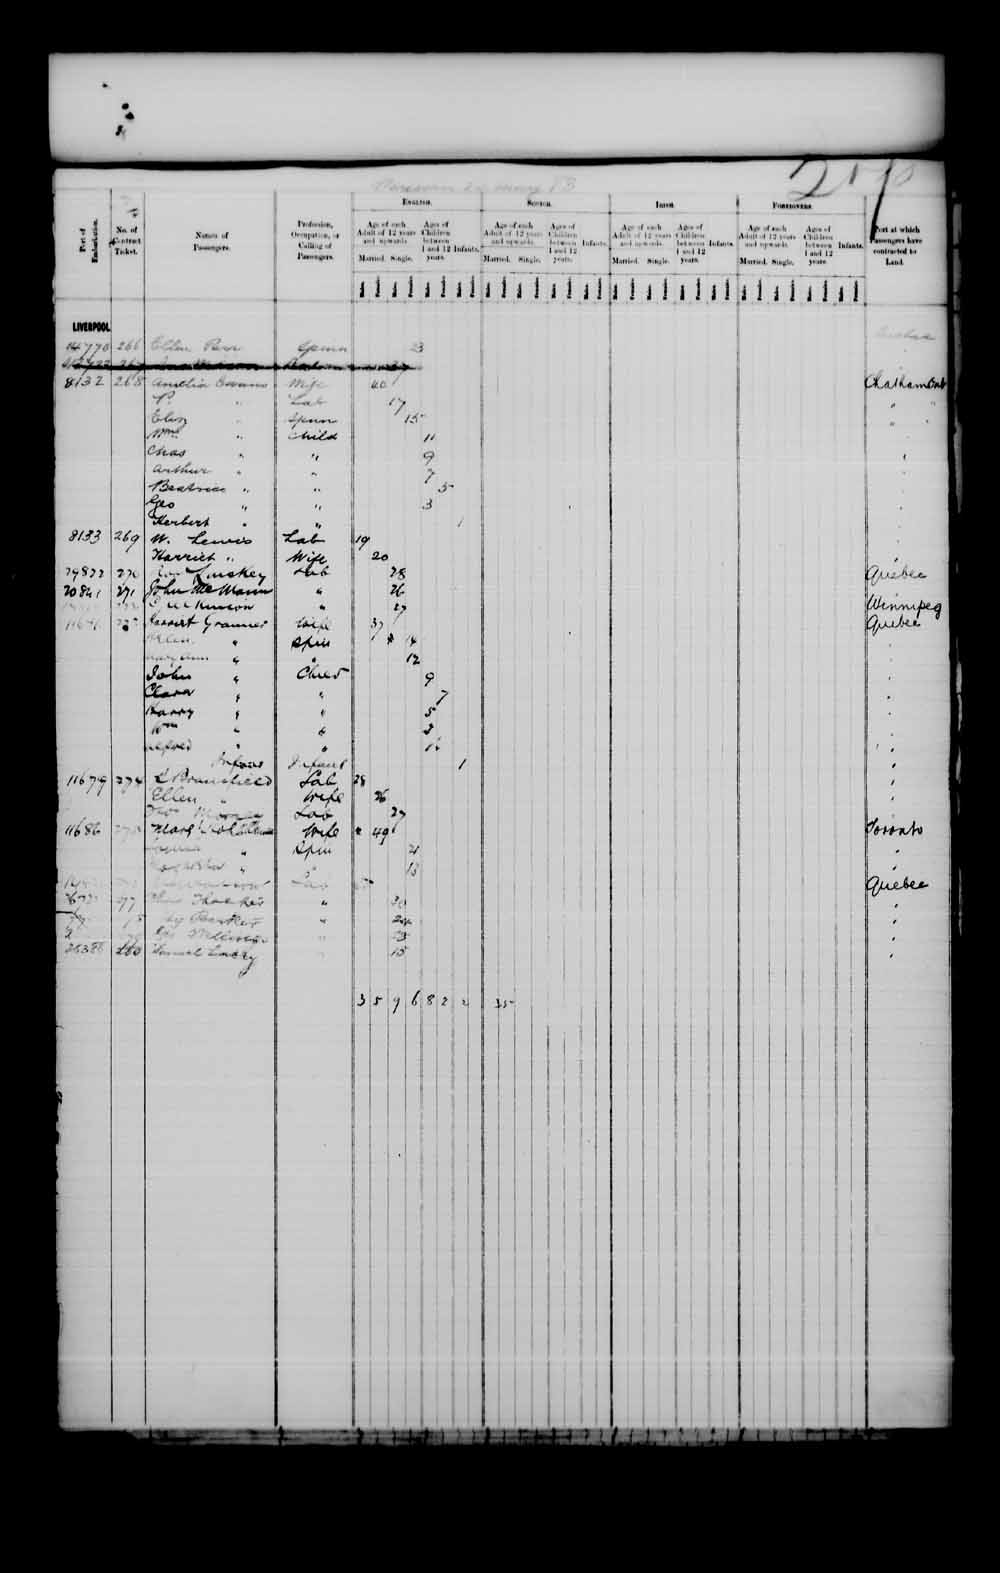 Digitized page of Quebec Passenger Lists for Image No.: e003543011